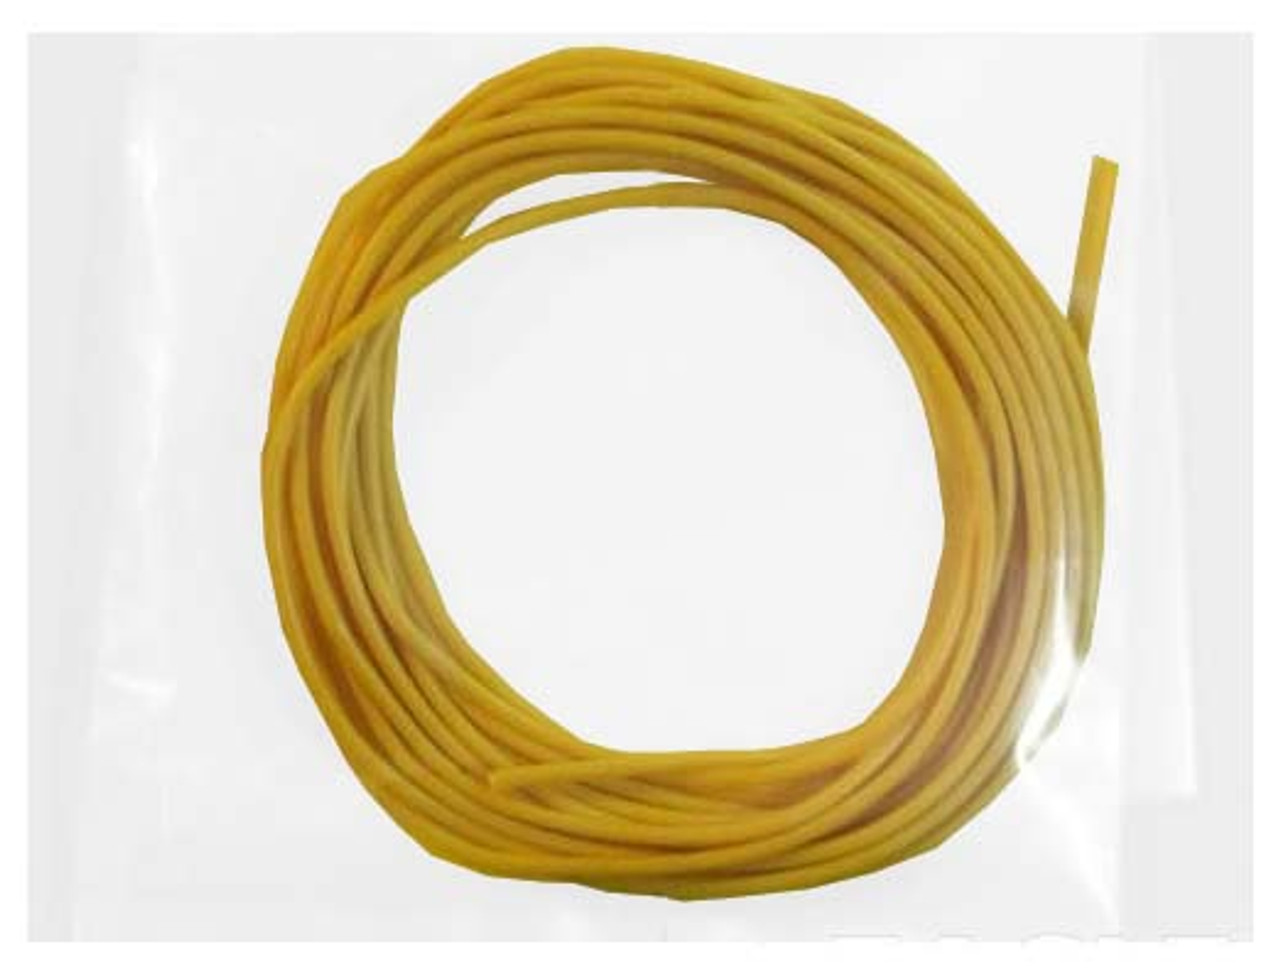 Slick 7 20 Gauge Silicone Leadwire 10 Ft S7212